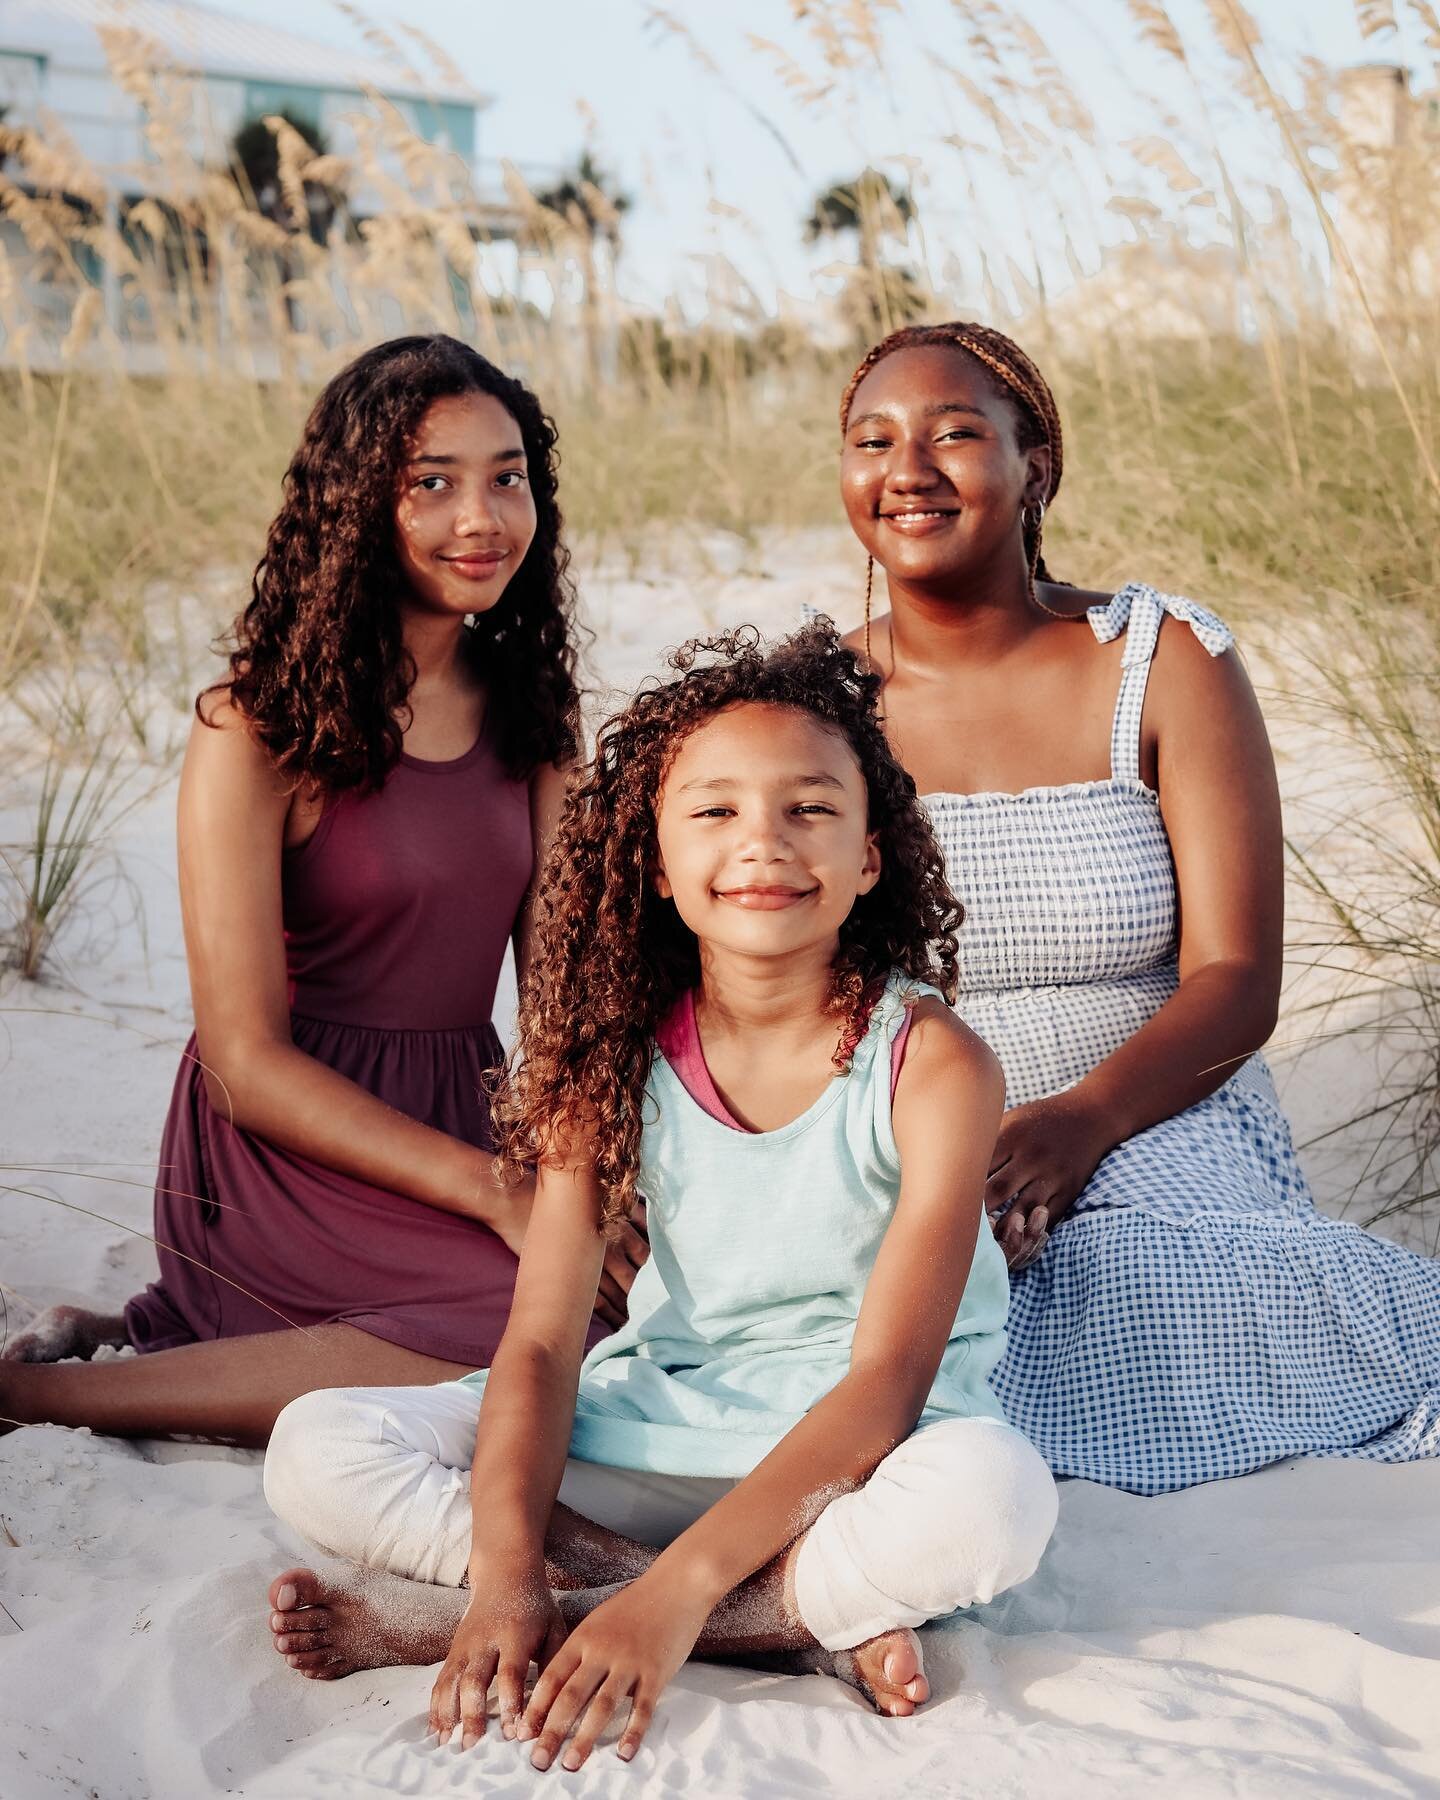 These beautiful ladies were so fun to shoot with!! Their story and bond are both so sweet, and I always love spending time with them.✨📸
&bull;
&bull;
&bull;
#goldenhour #portraitphotography #familyportraits #orangebeachalabama #vacationportraits #ca